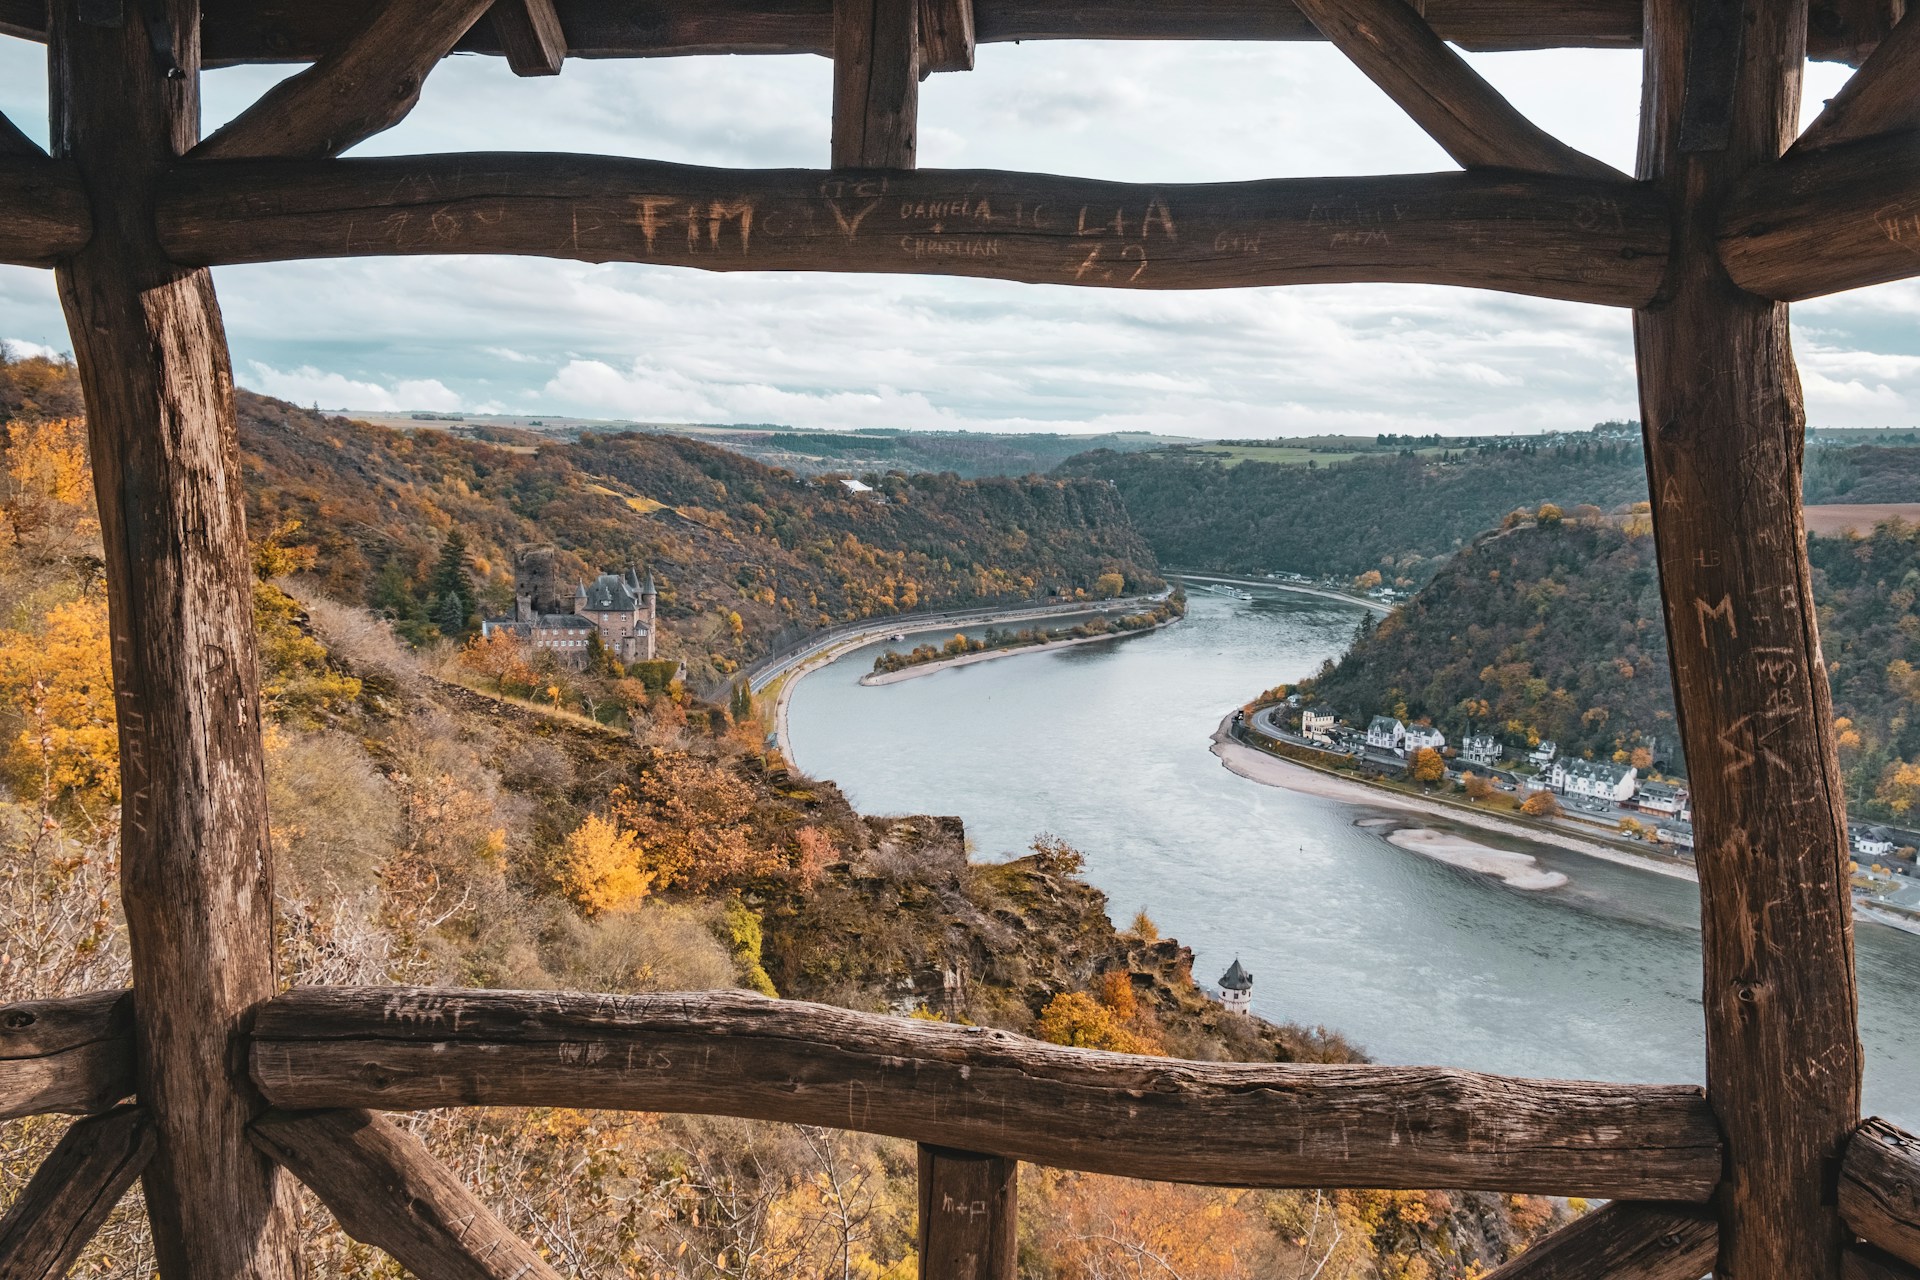 View of the Rhine Valley in Autumn, as seen through a wooden scaffolding structure